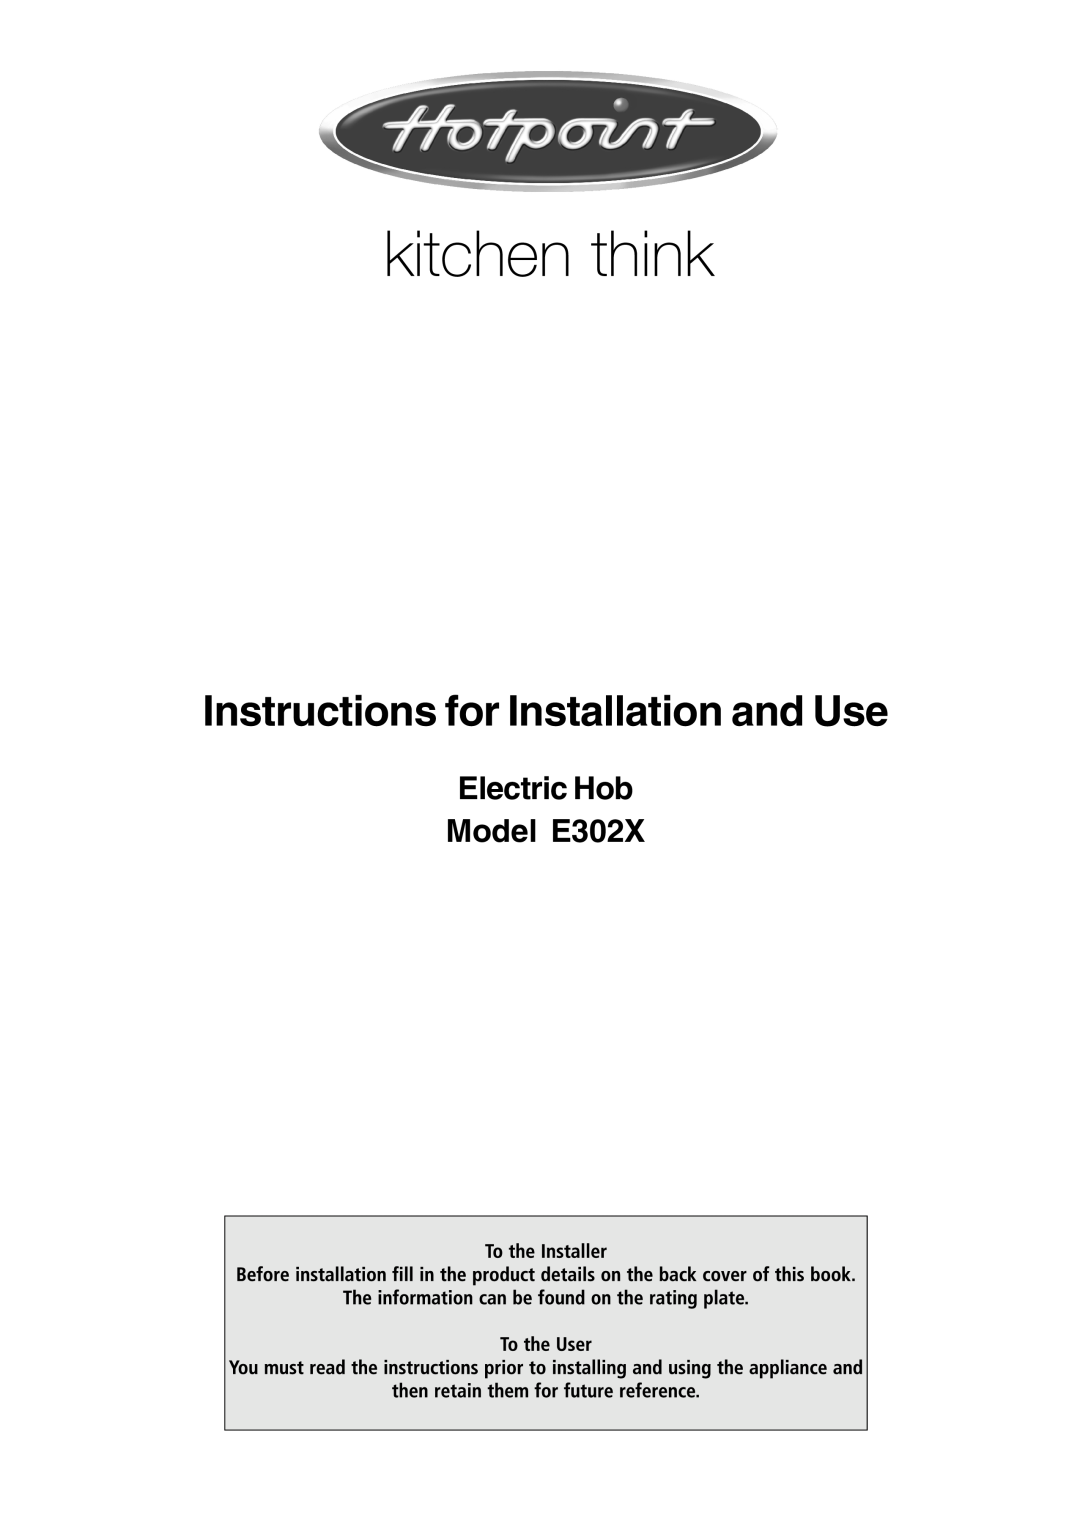 Hotpoint manual Electric Hob Model E302X, Instructions for Installation and Use 